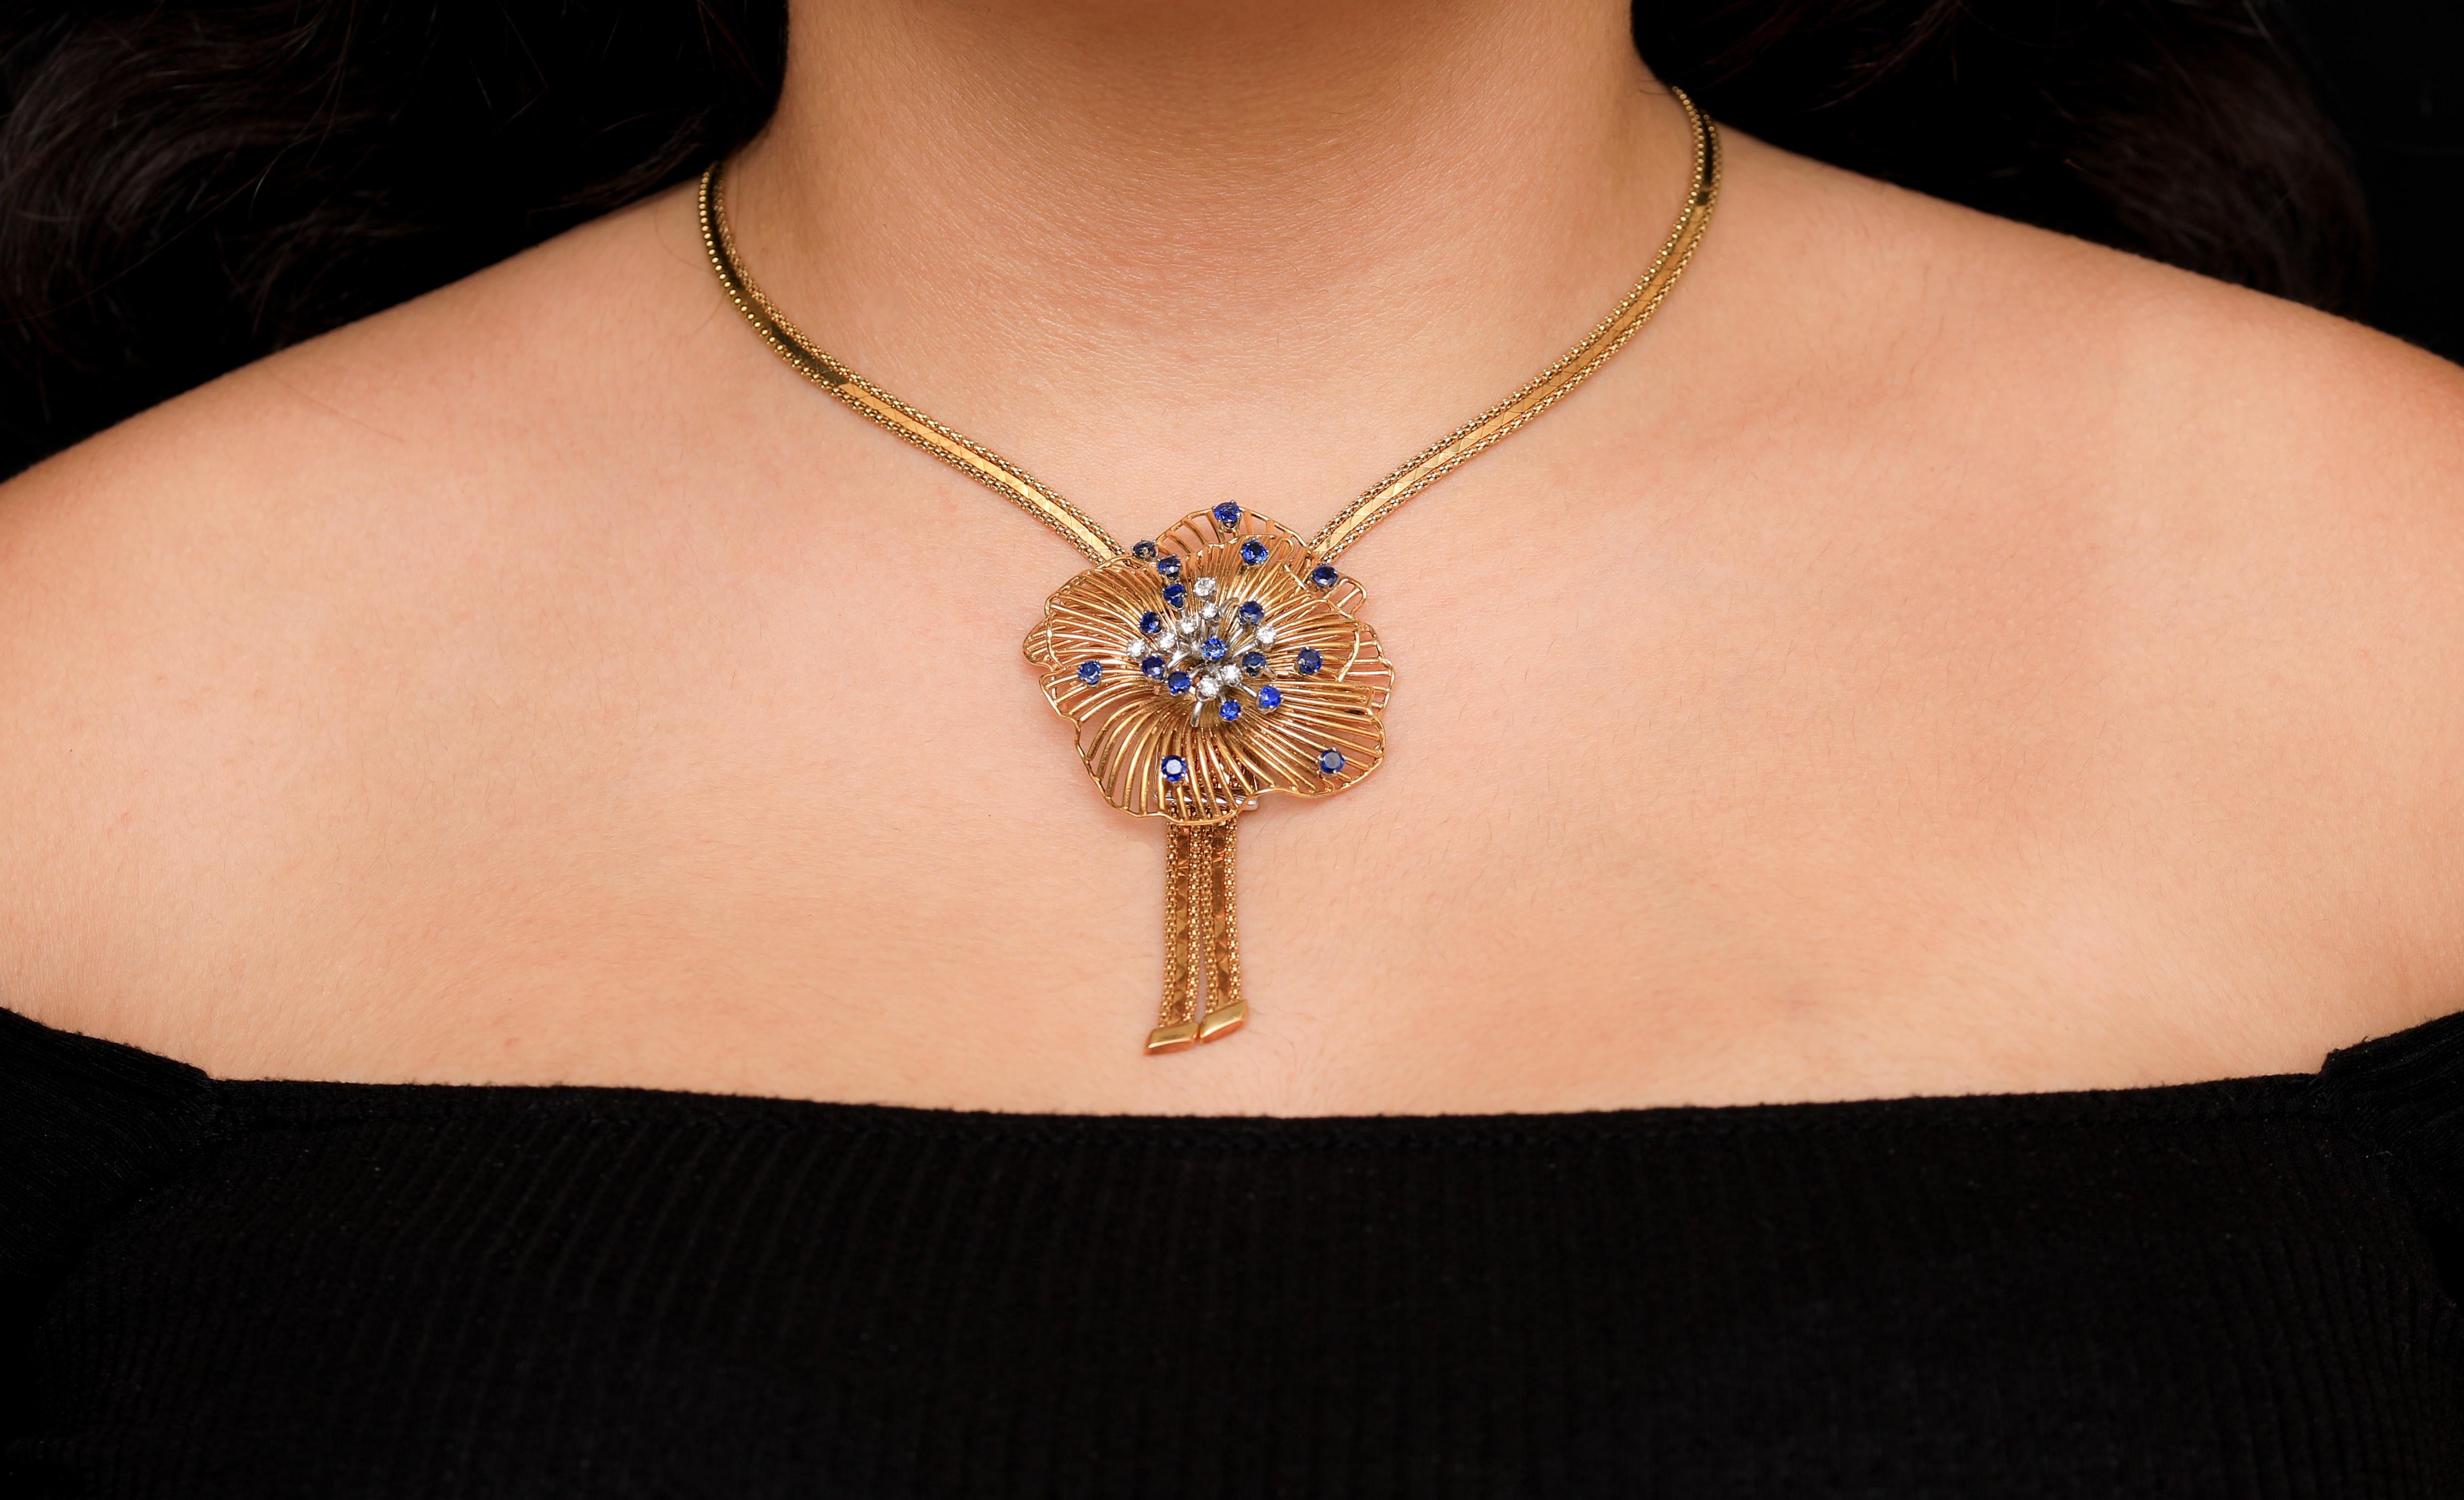 1960's Sapphire Diamond Gold Starburst Necklace

An 18k Gold vintage floral necklace, showcasing a beautifully crafted large flower. The centered piece is scattered with 2.00 carats of natural sapphires and .50 carat of G color VS clarity diamonds.